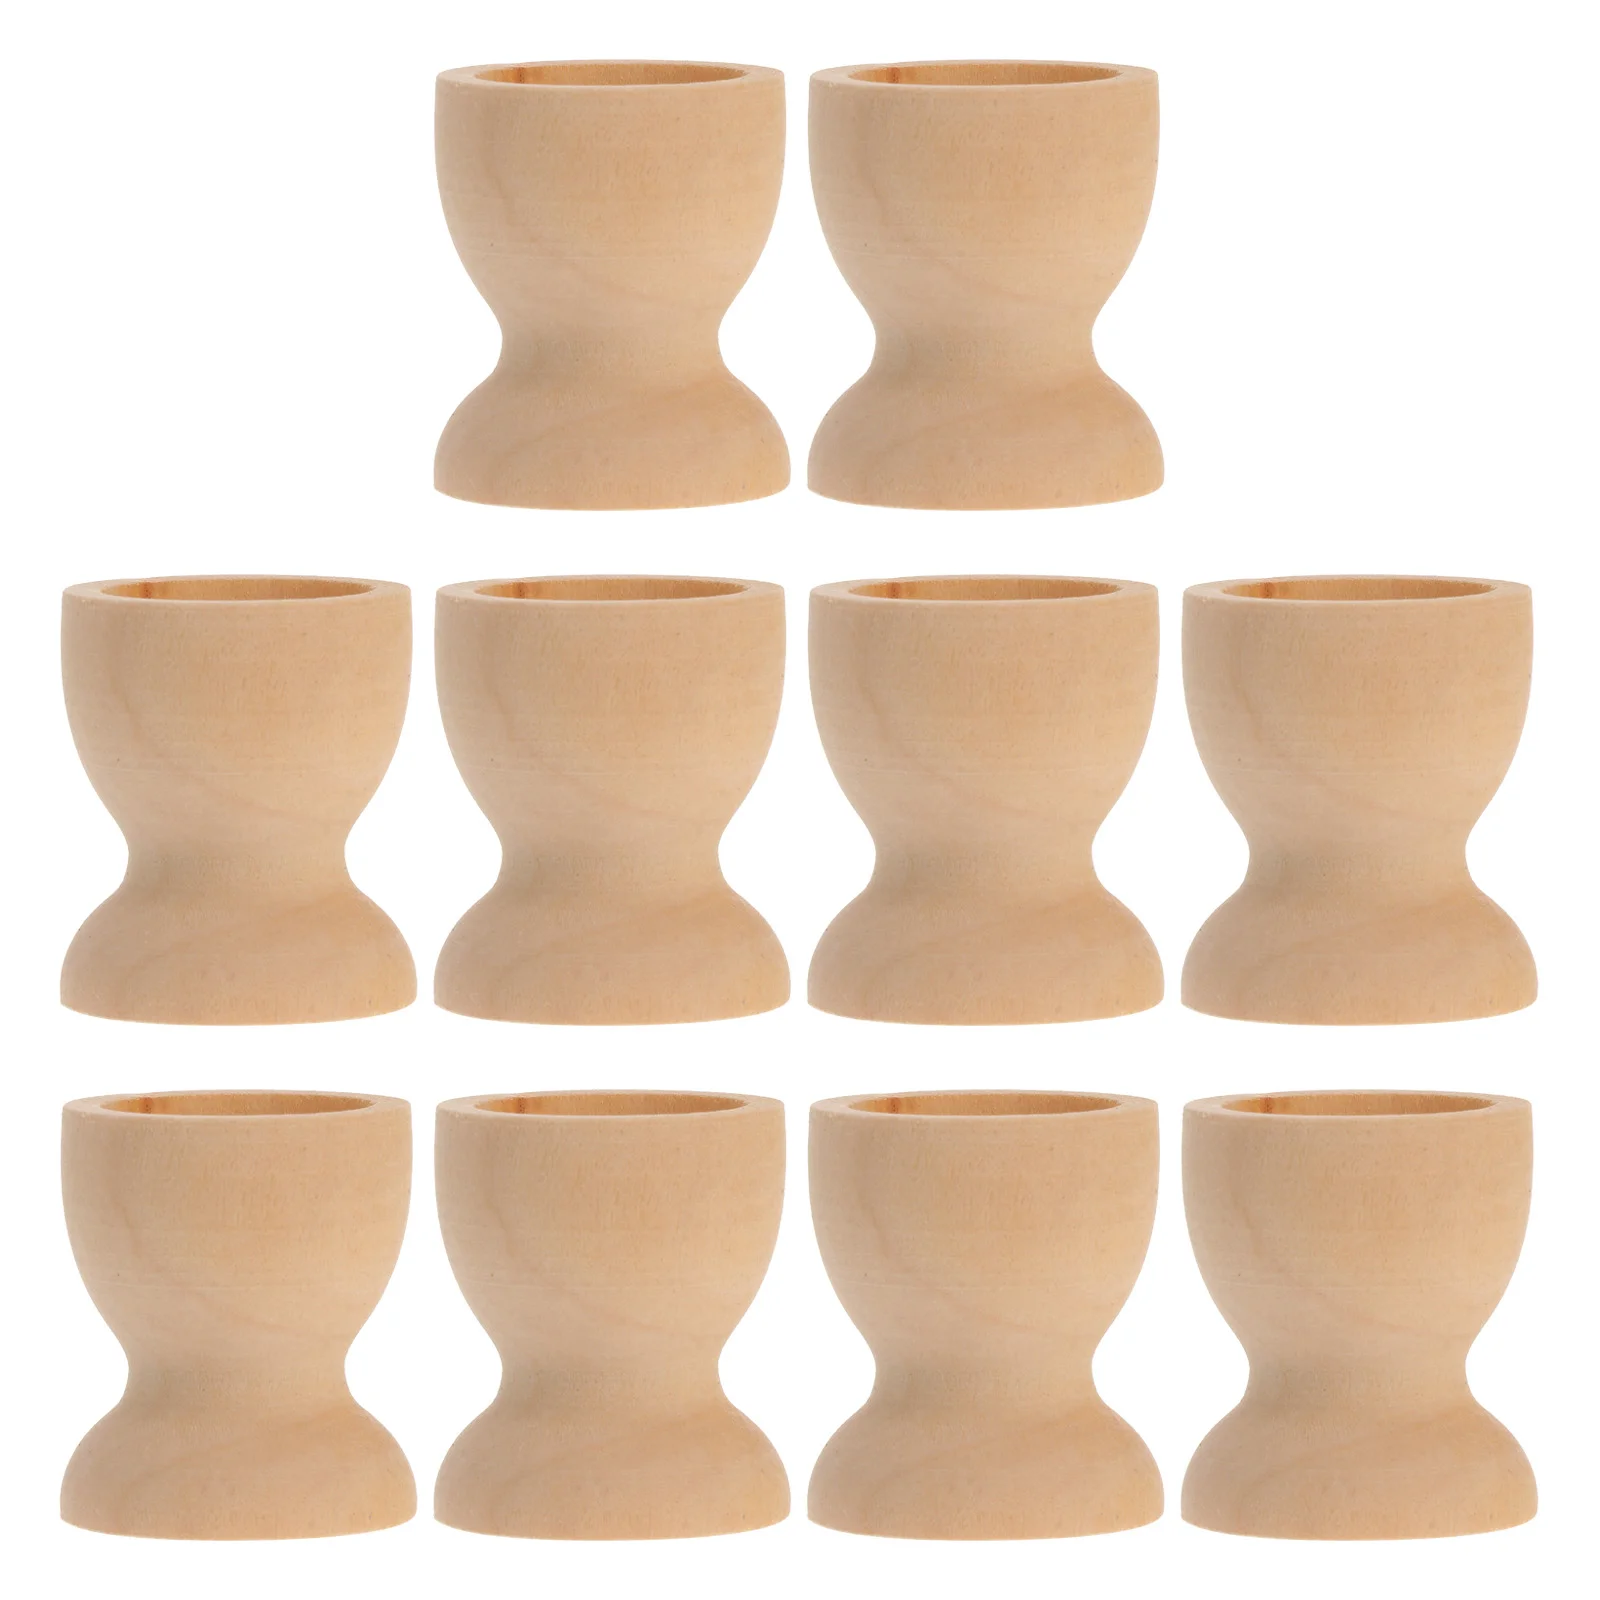 

Egg Wooden Holder Easter Cup Cups Stand Holders Unfinished Wood Tray Eggs Boiled Display Stands Kitchen Serving Tools Craft Hard